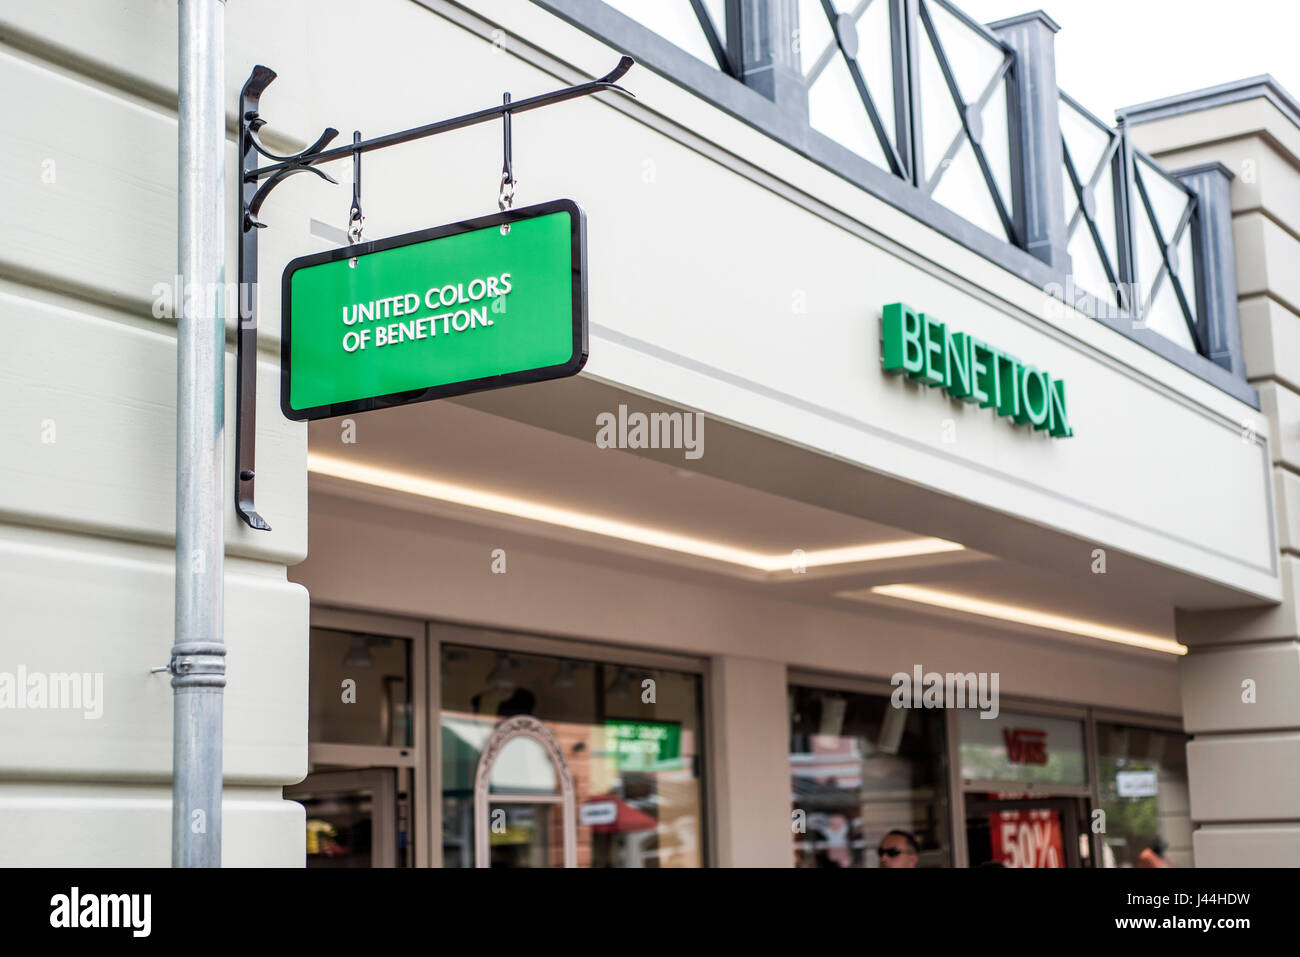 Page 2 - Benetton Store High Resolution Stock Photography and Images - Alamy